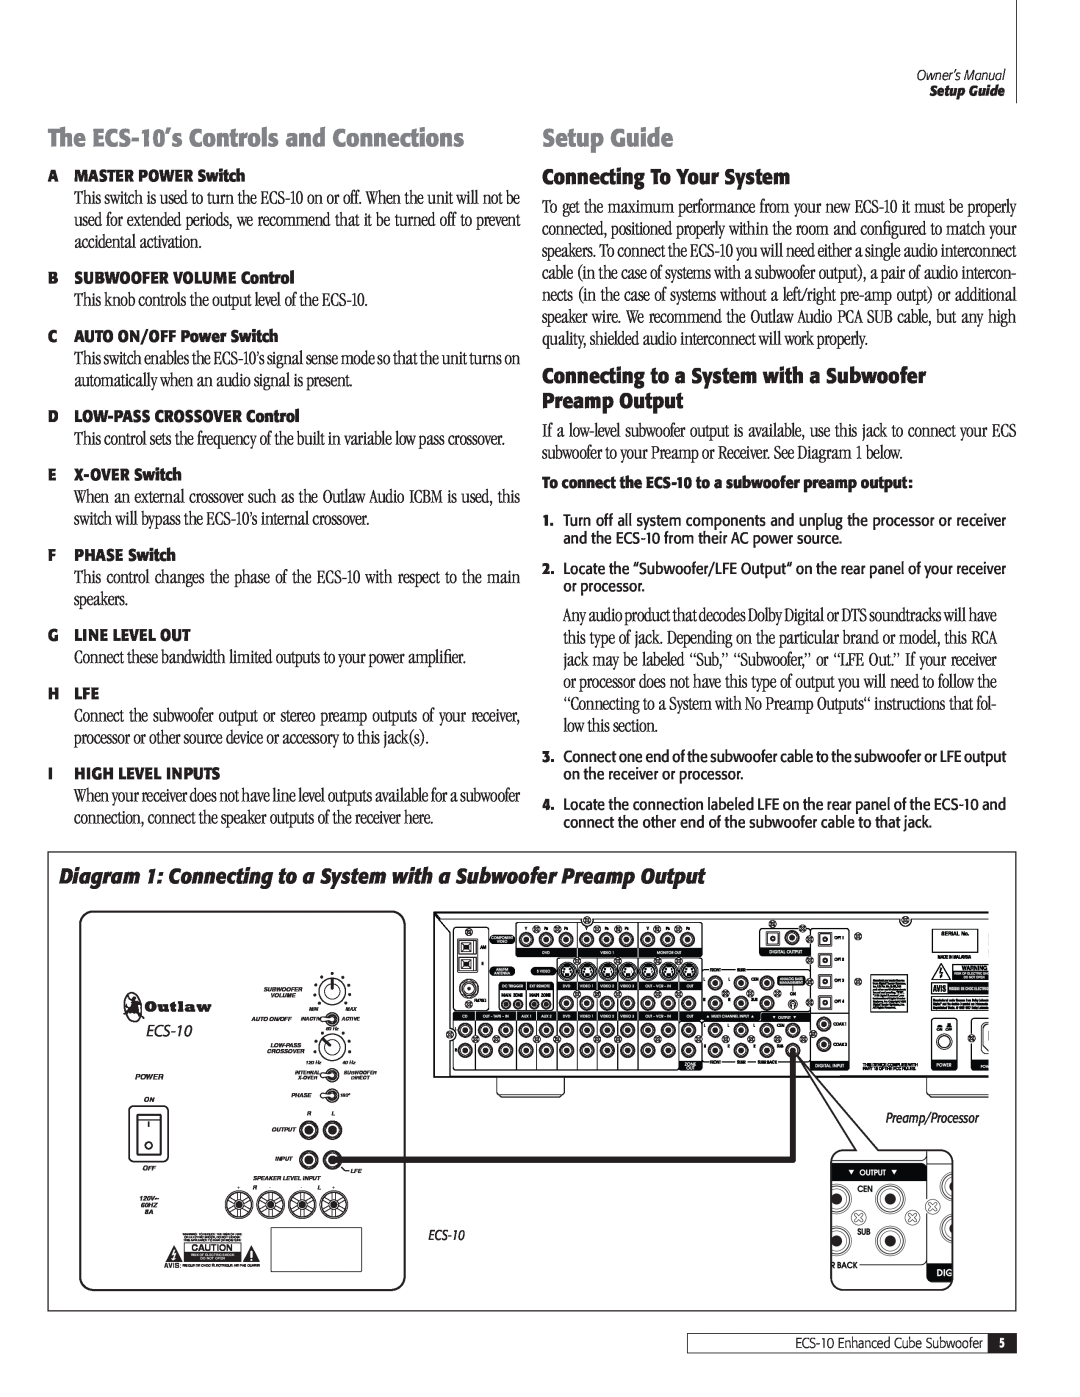 Outlaw Audio owner manual The ECS-10’sControls and Connections, Setup Guide, Connecting To Your System 